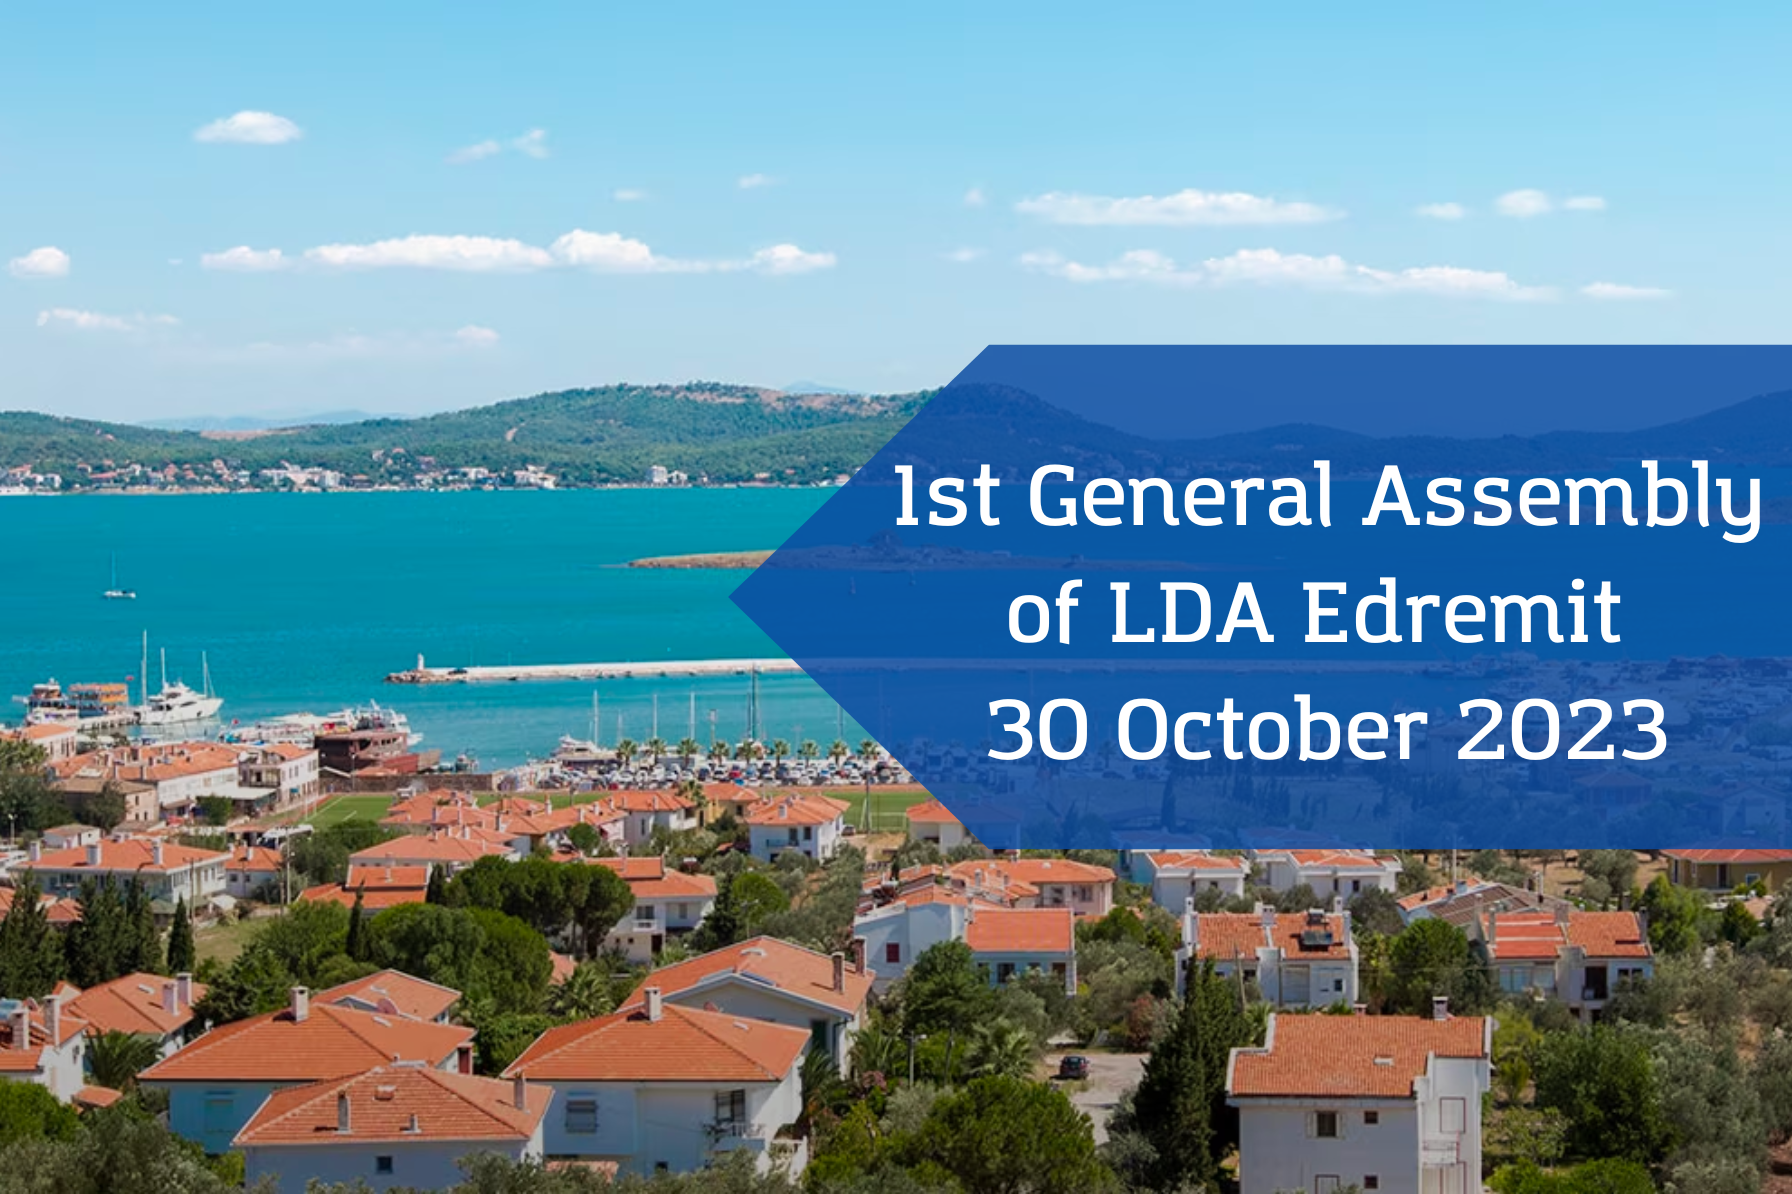 ALDA will participate to the first General Assembly of Local Democracy Agency Edremit (in Türkiye), with the presence of ALDA Secretary General Antonella Valmorbida, together with other organisations such as Lushnje Municipality, Budva Municipality (online), elbarlament, MEDAR, LDA Mostar, Région Grand Est. 